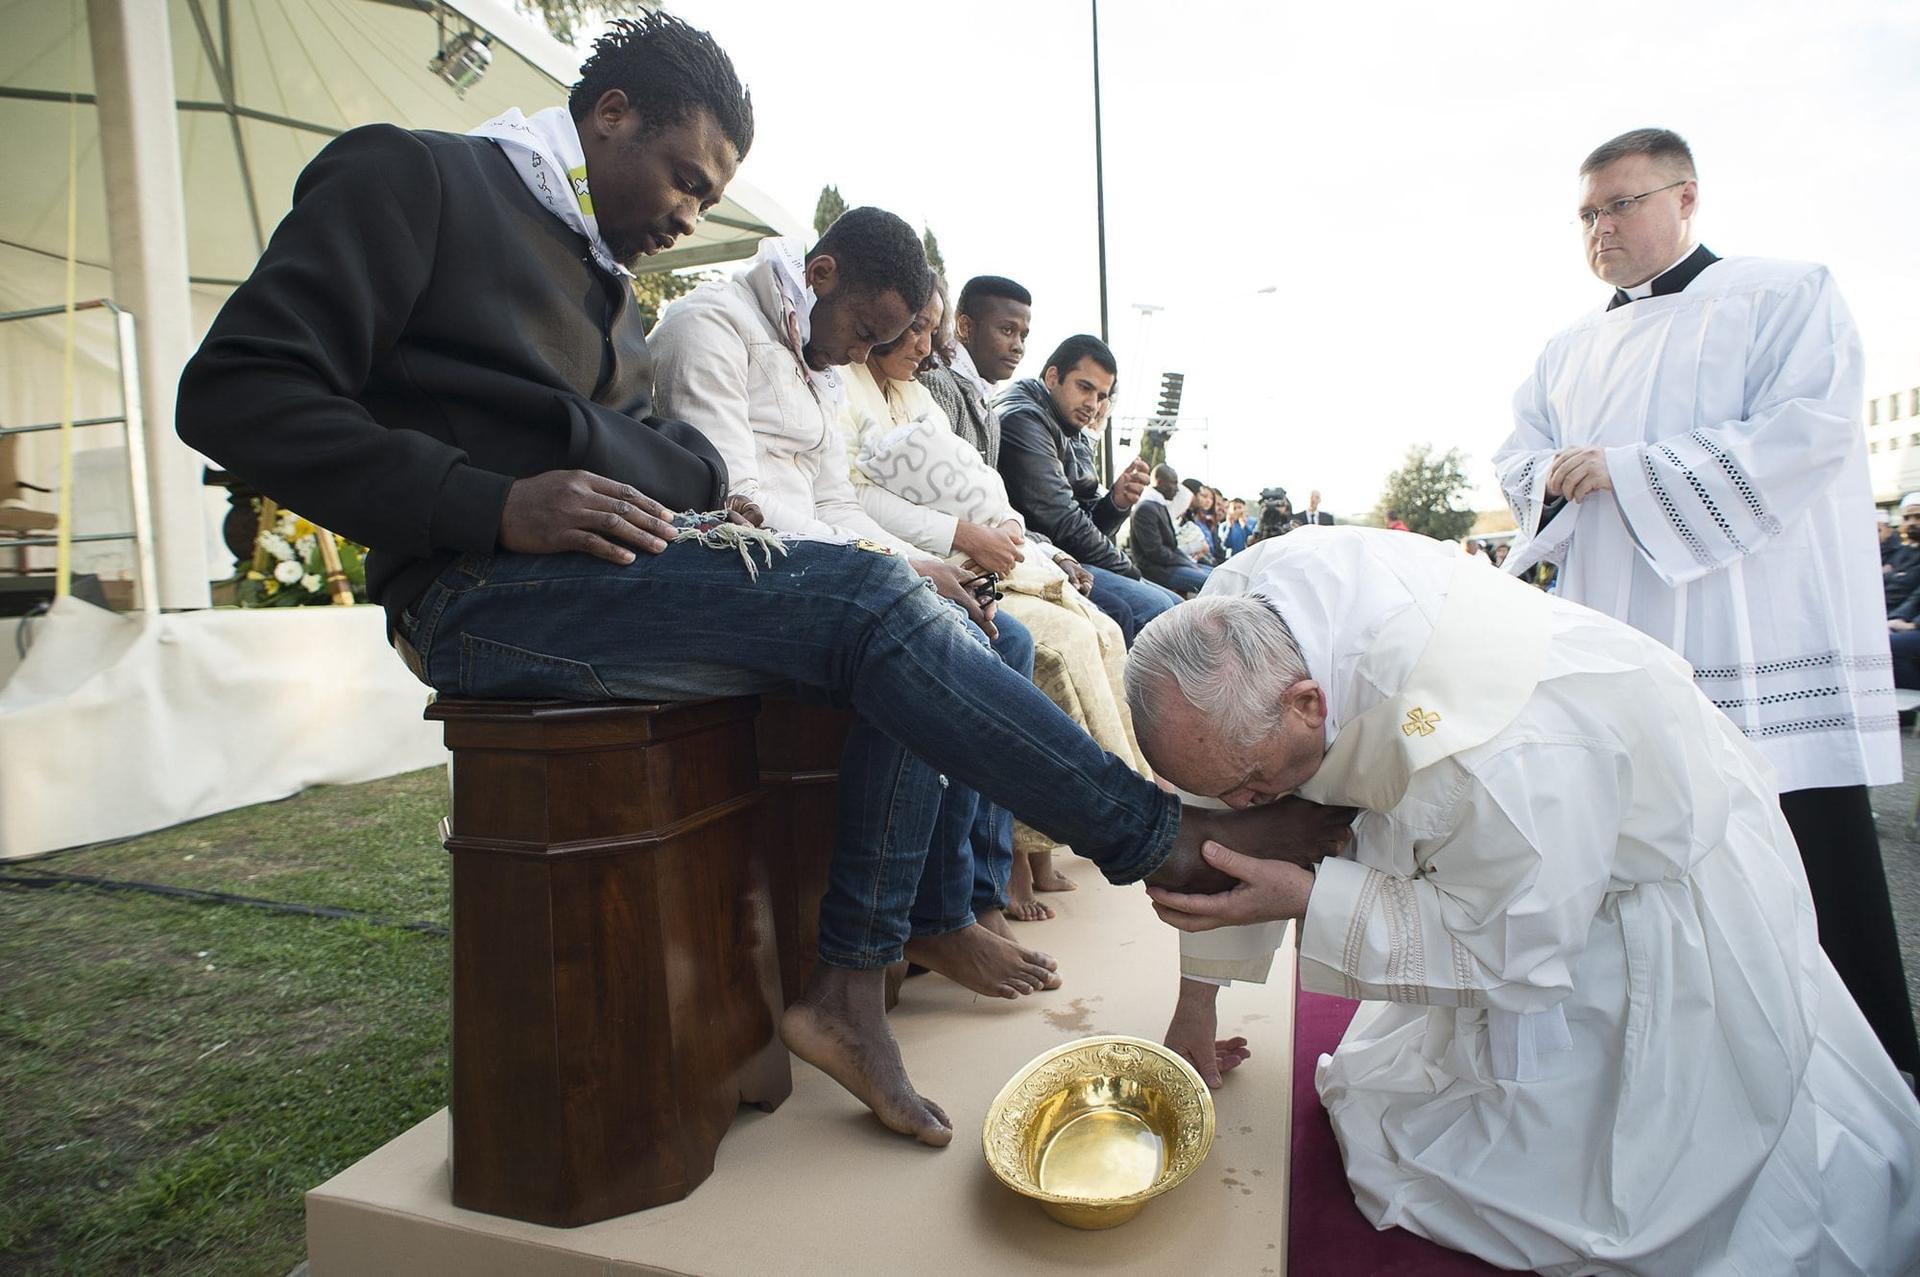 Eastern Catholics debate pope’s edict on women and foot-washing